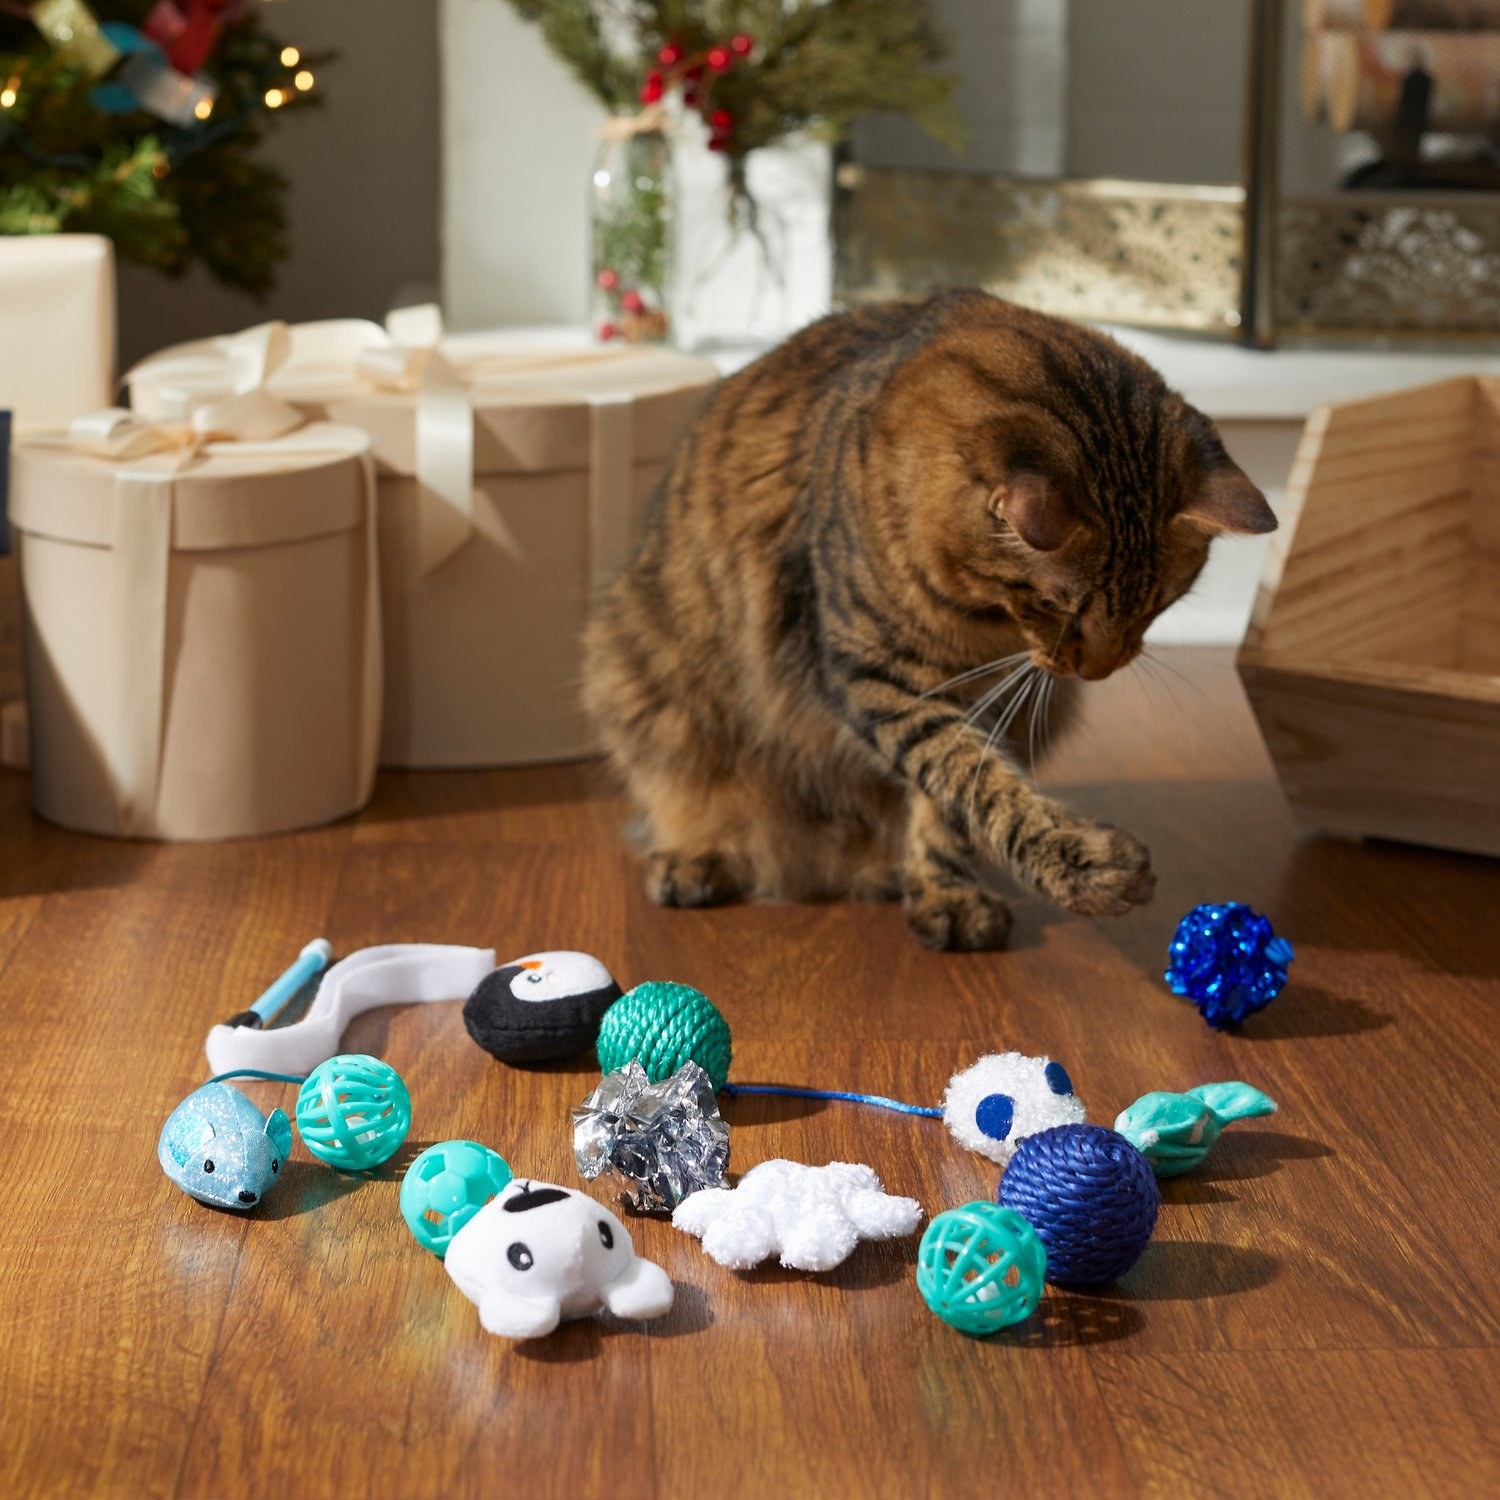 A cat looking at a variety of blue, winter-themed toys.